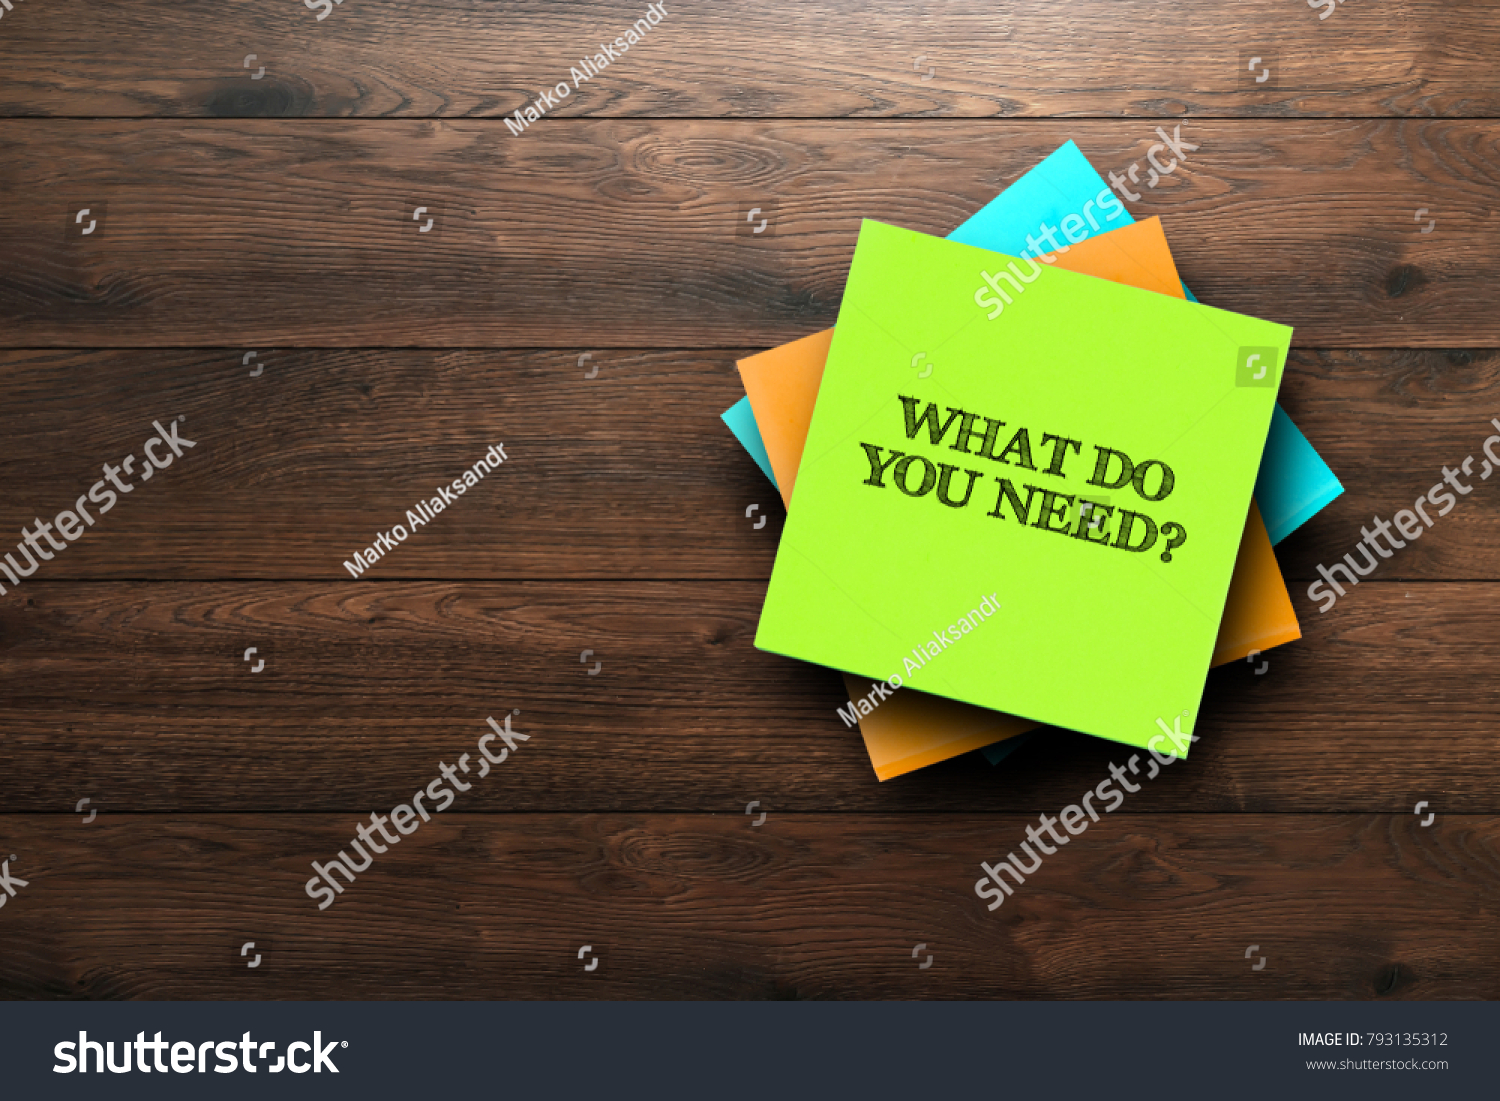 What Do You Need, the phrase is written on multi-colored stickers, on a brown wooden background. Business concept, strategy, plan, planning. #793135312